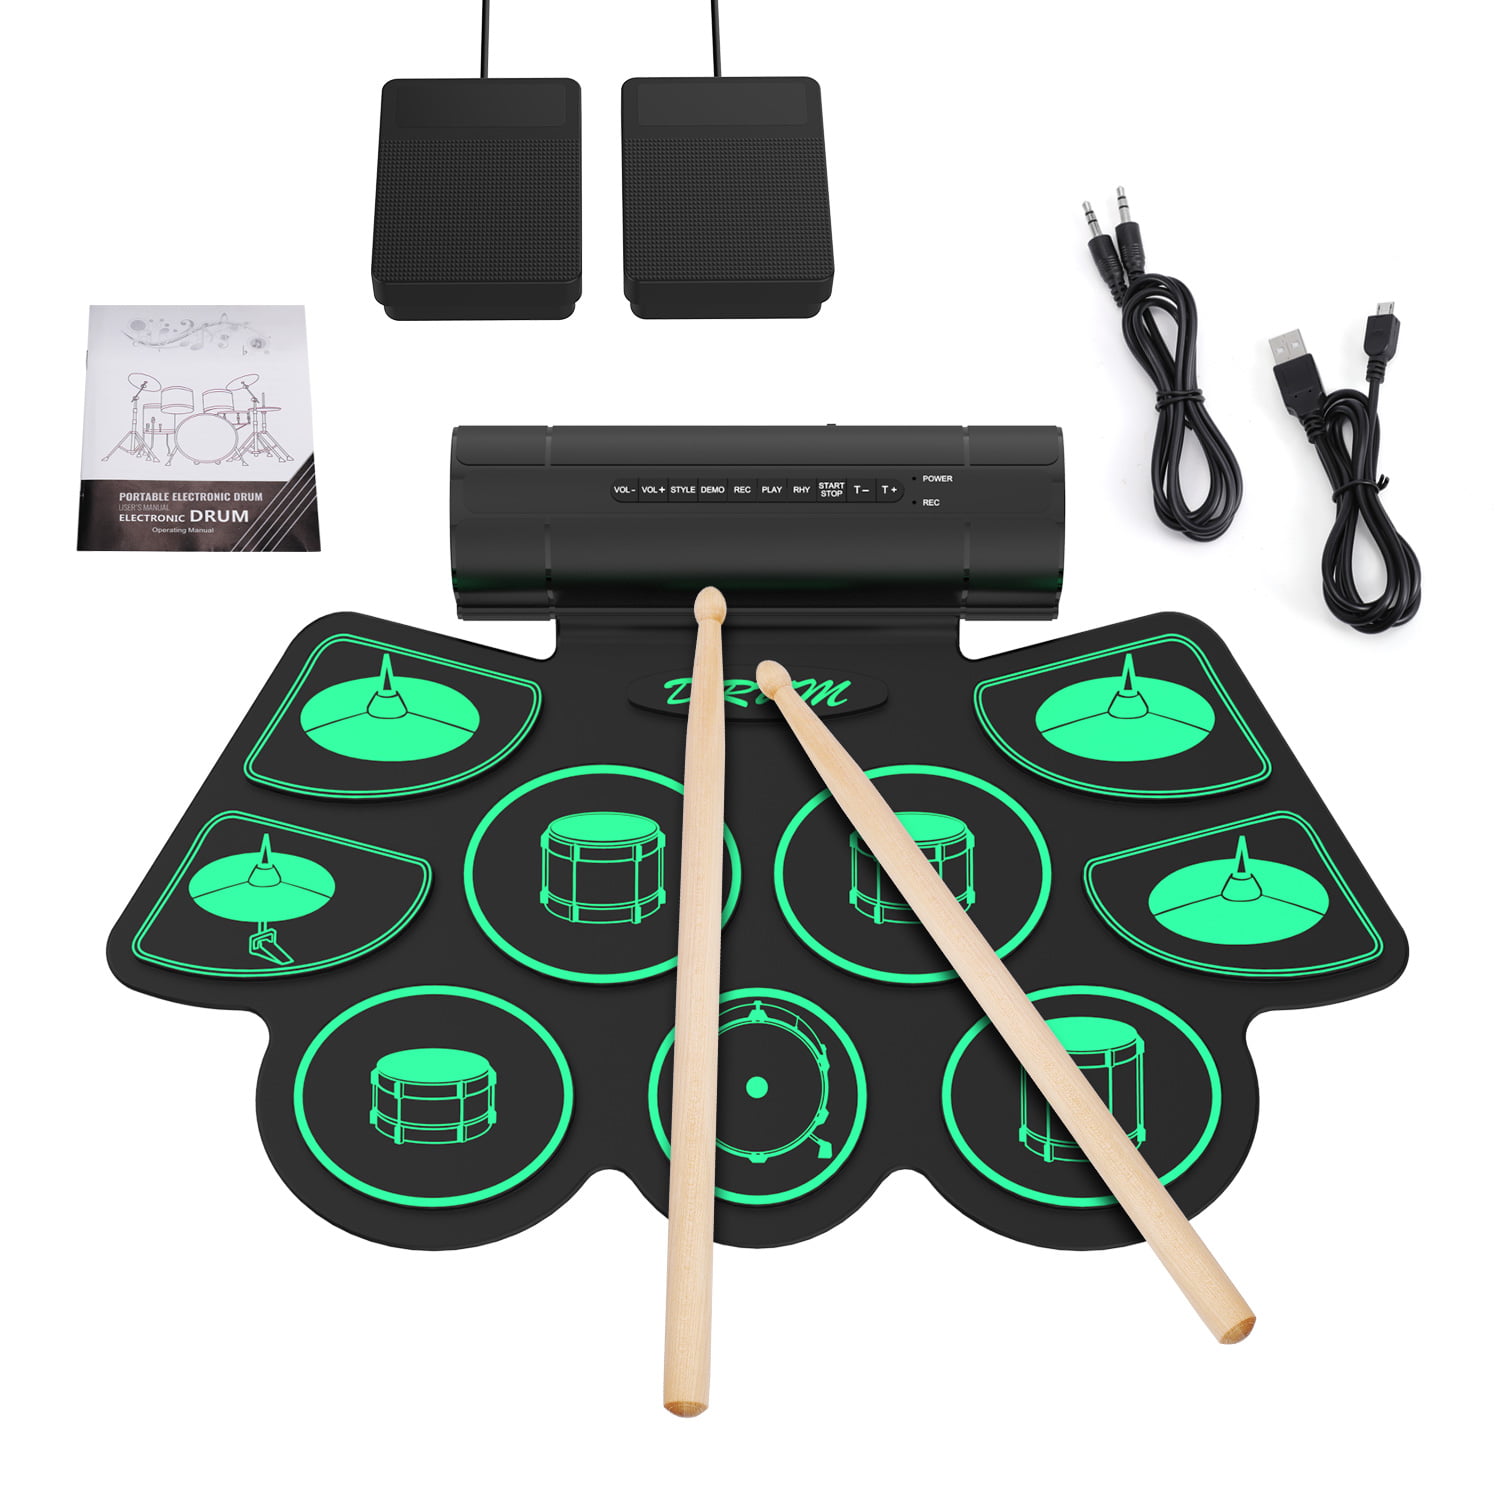 Kids Electronic Drum Set,Midi Portable Electronic Roll Up Drum Kit,Best Birthday Gift for KidsandBeginners ,Kids Drum with Built in Speakers and Drumsticks